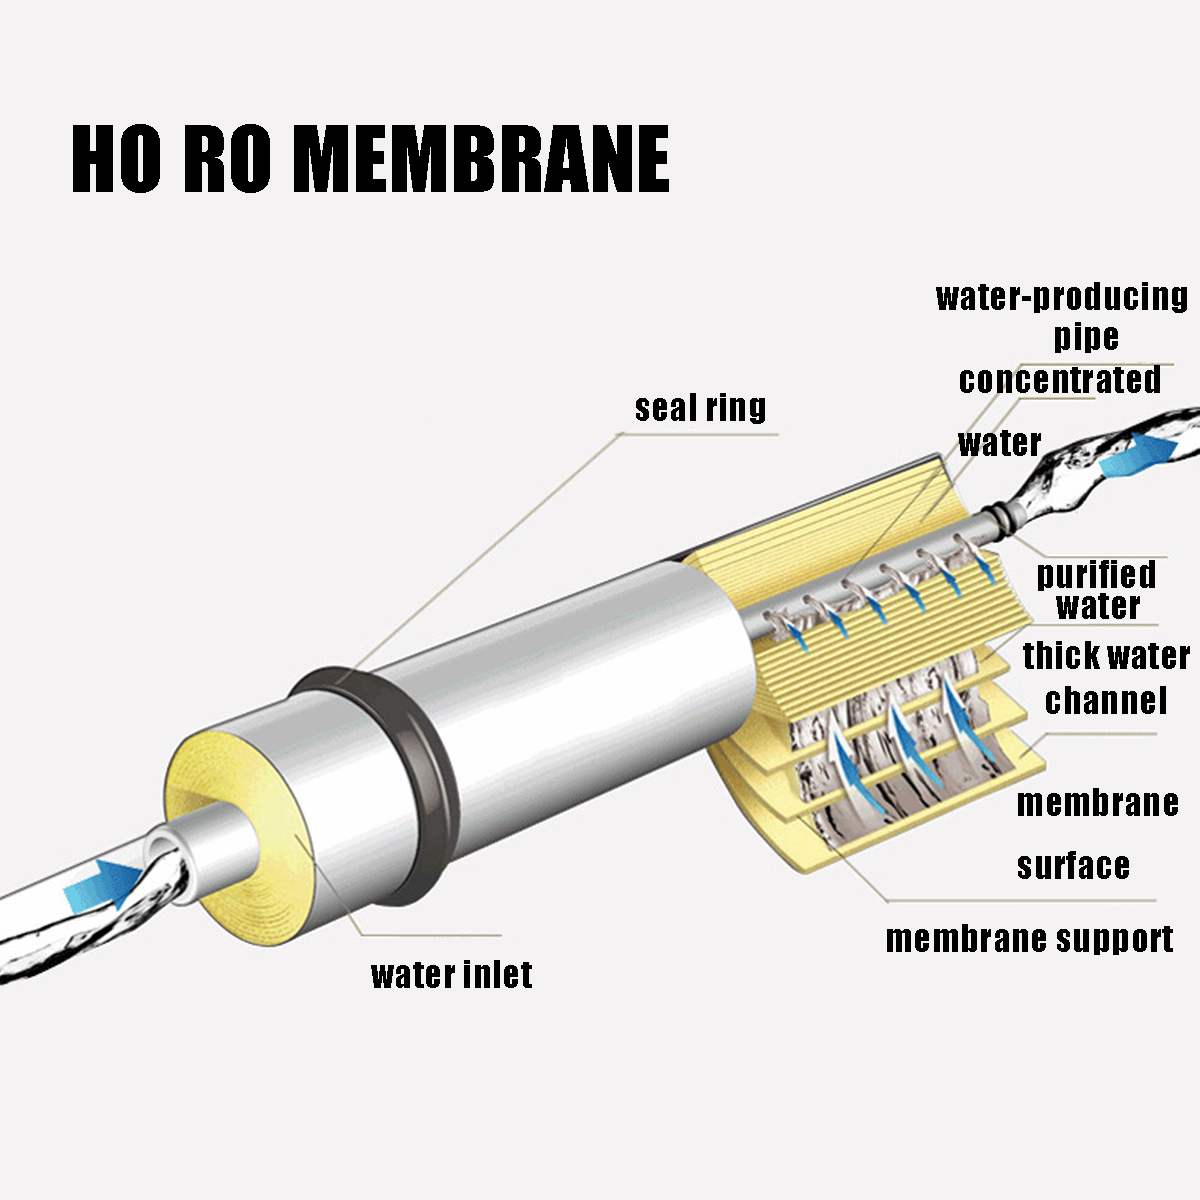 50-400GPD-RO-Membrane-Purify-Water-System-Filter-Reverse-Osmosis-Element-1516322-4